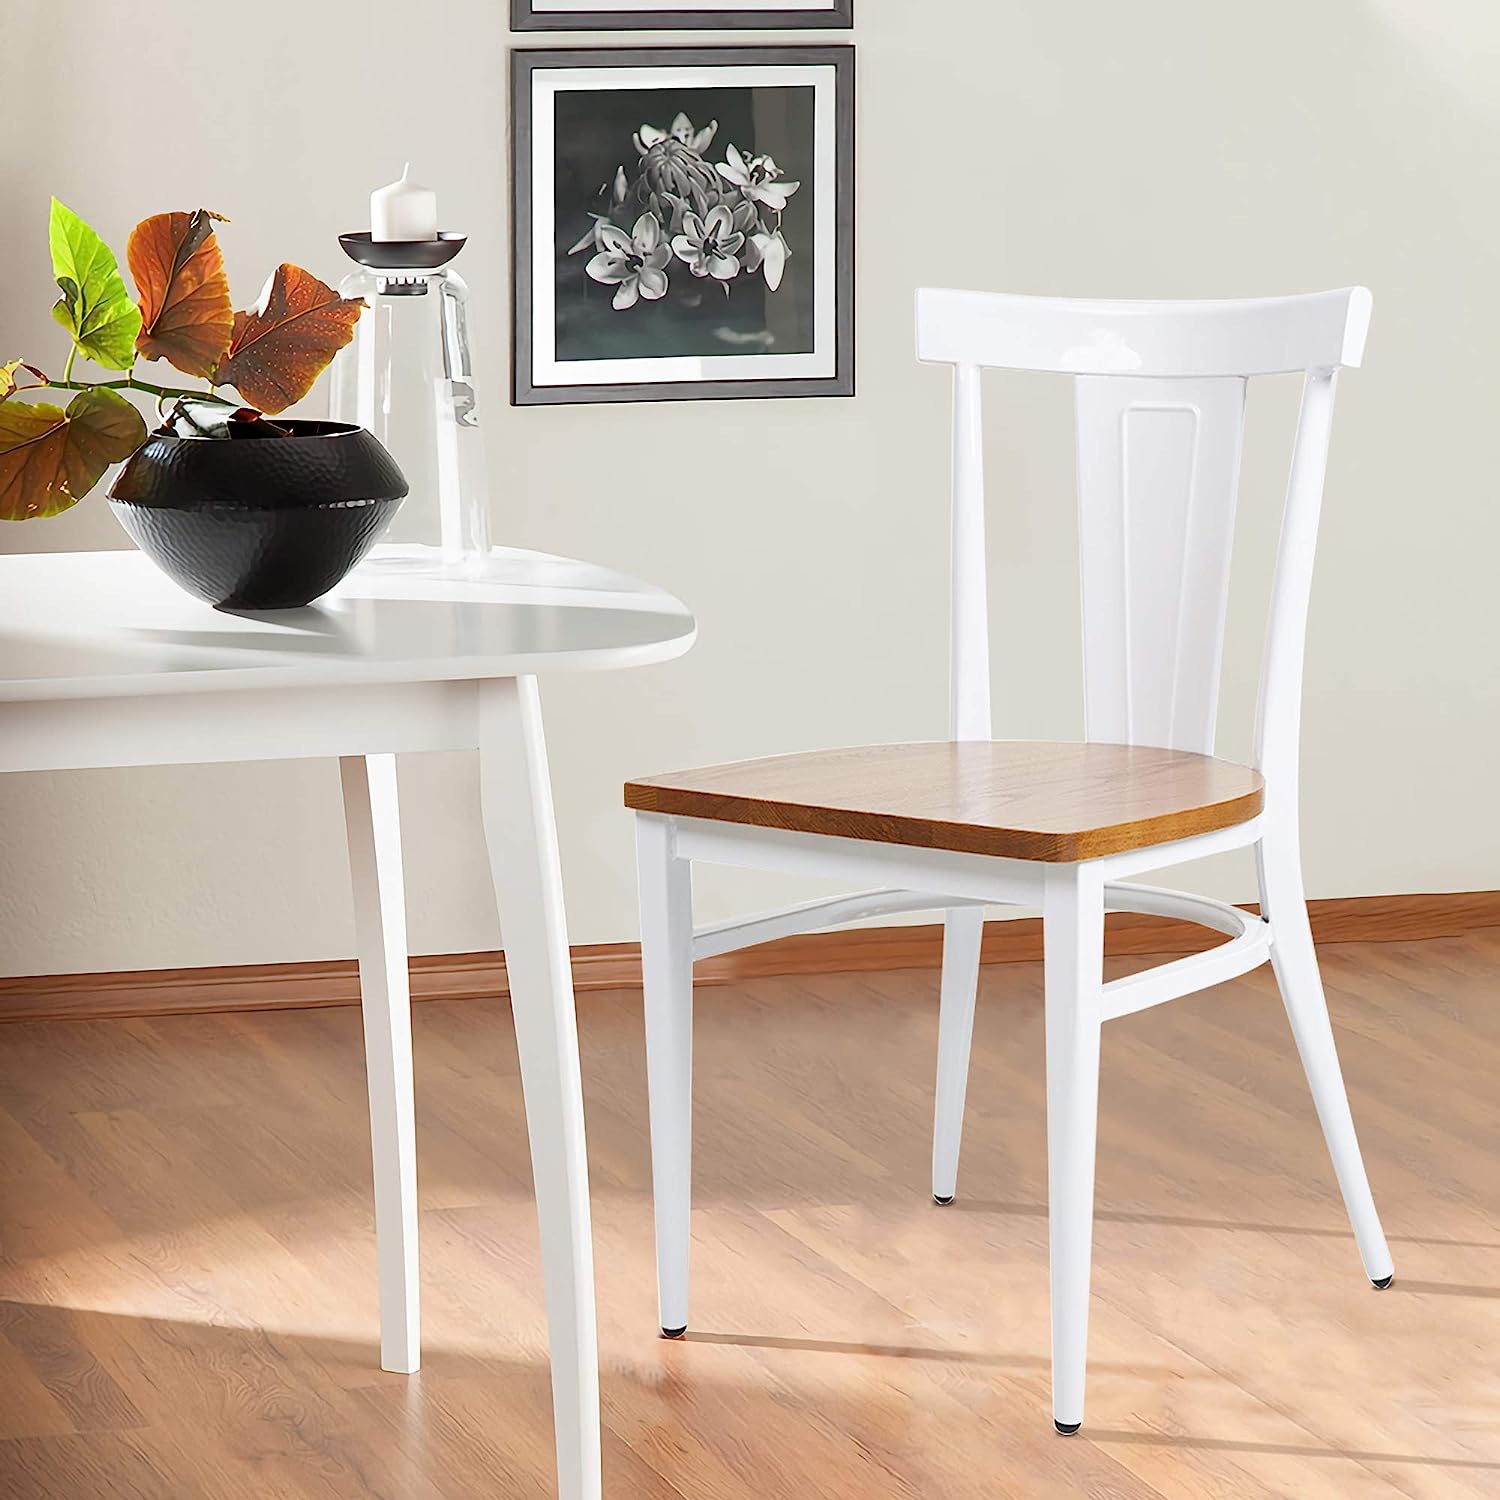 Luckyermore Set of 2 Dining Room Side Chair Wood Kitchen Chairs with Metal Legs Fully Assembled, White